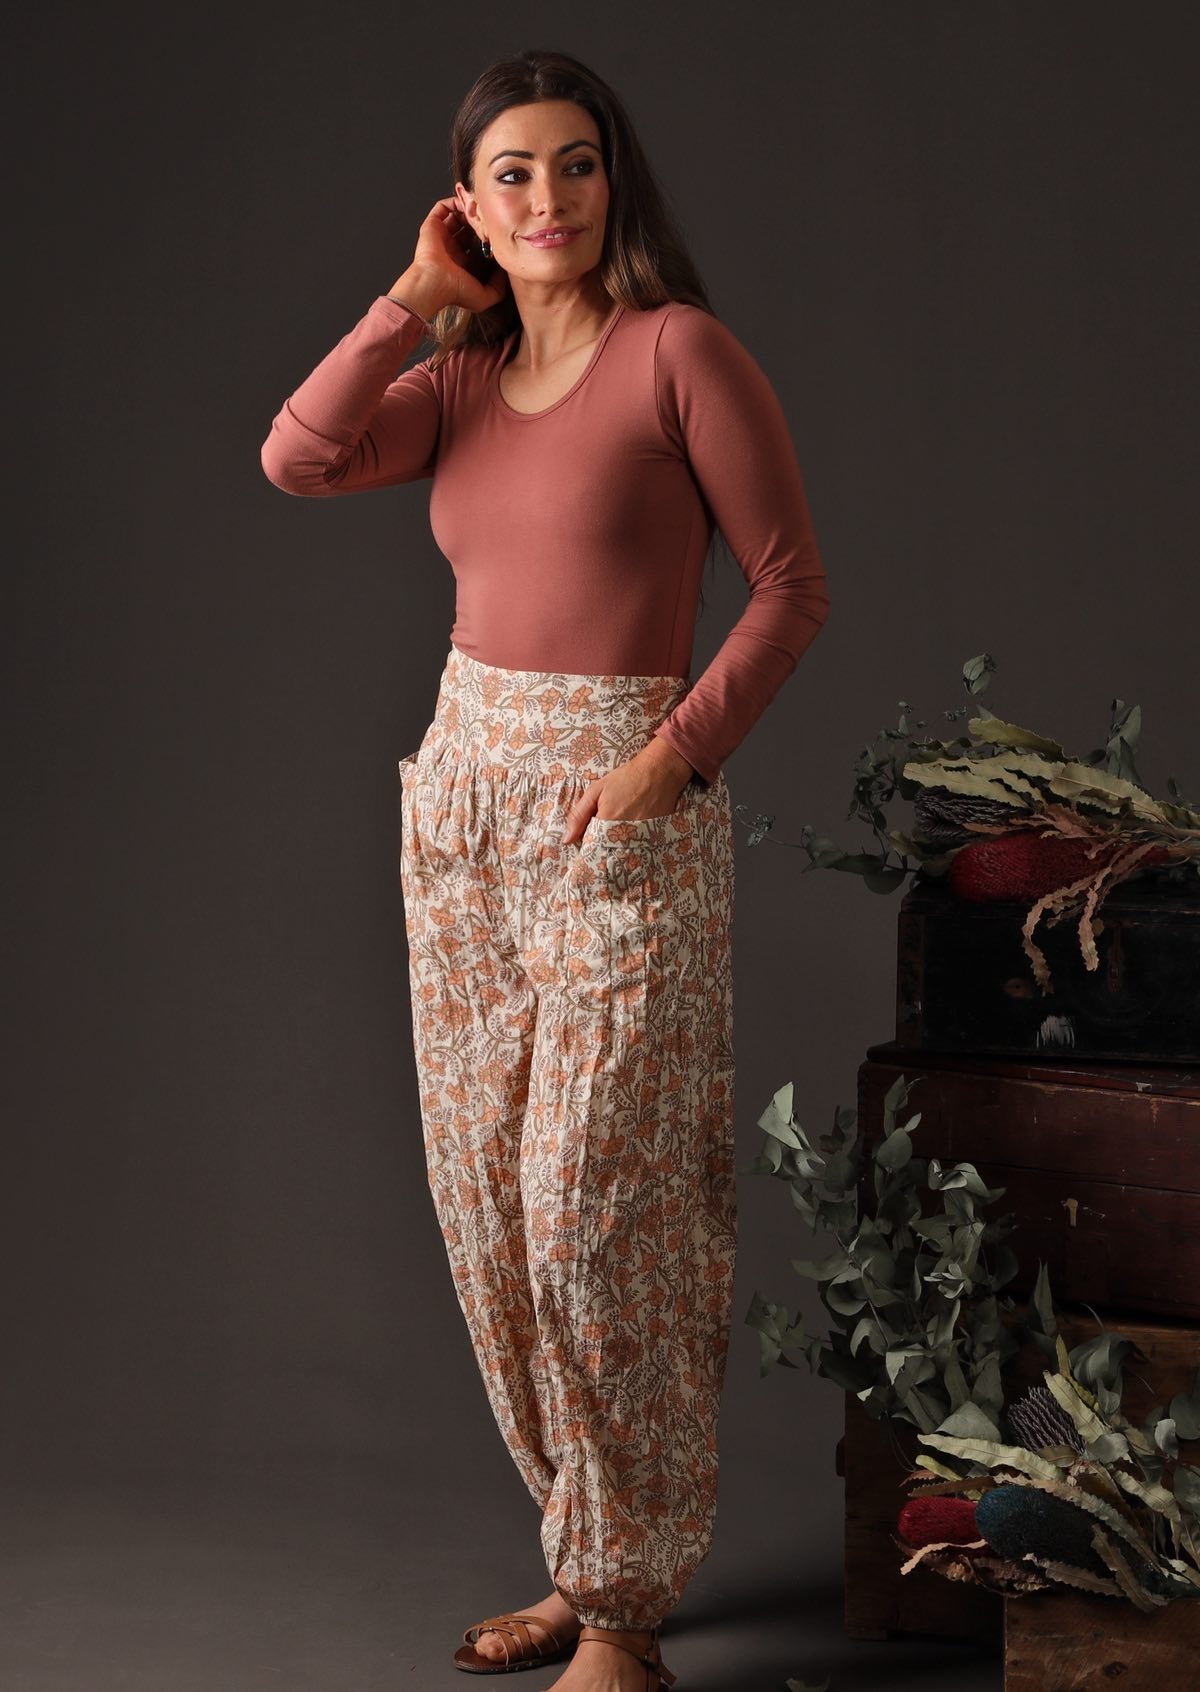 Model wears 100% cotton pants with an elastic waist and ankles. These loose fitting pants have pockets and feature a floral peach and green print on a cream base